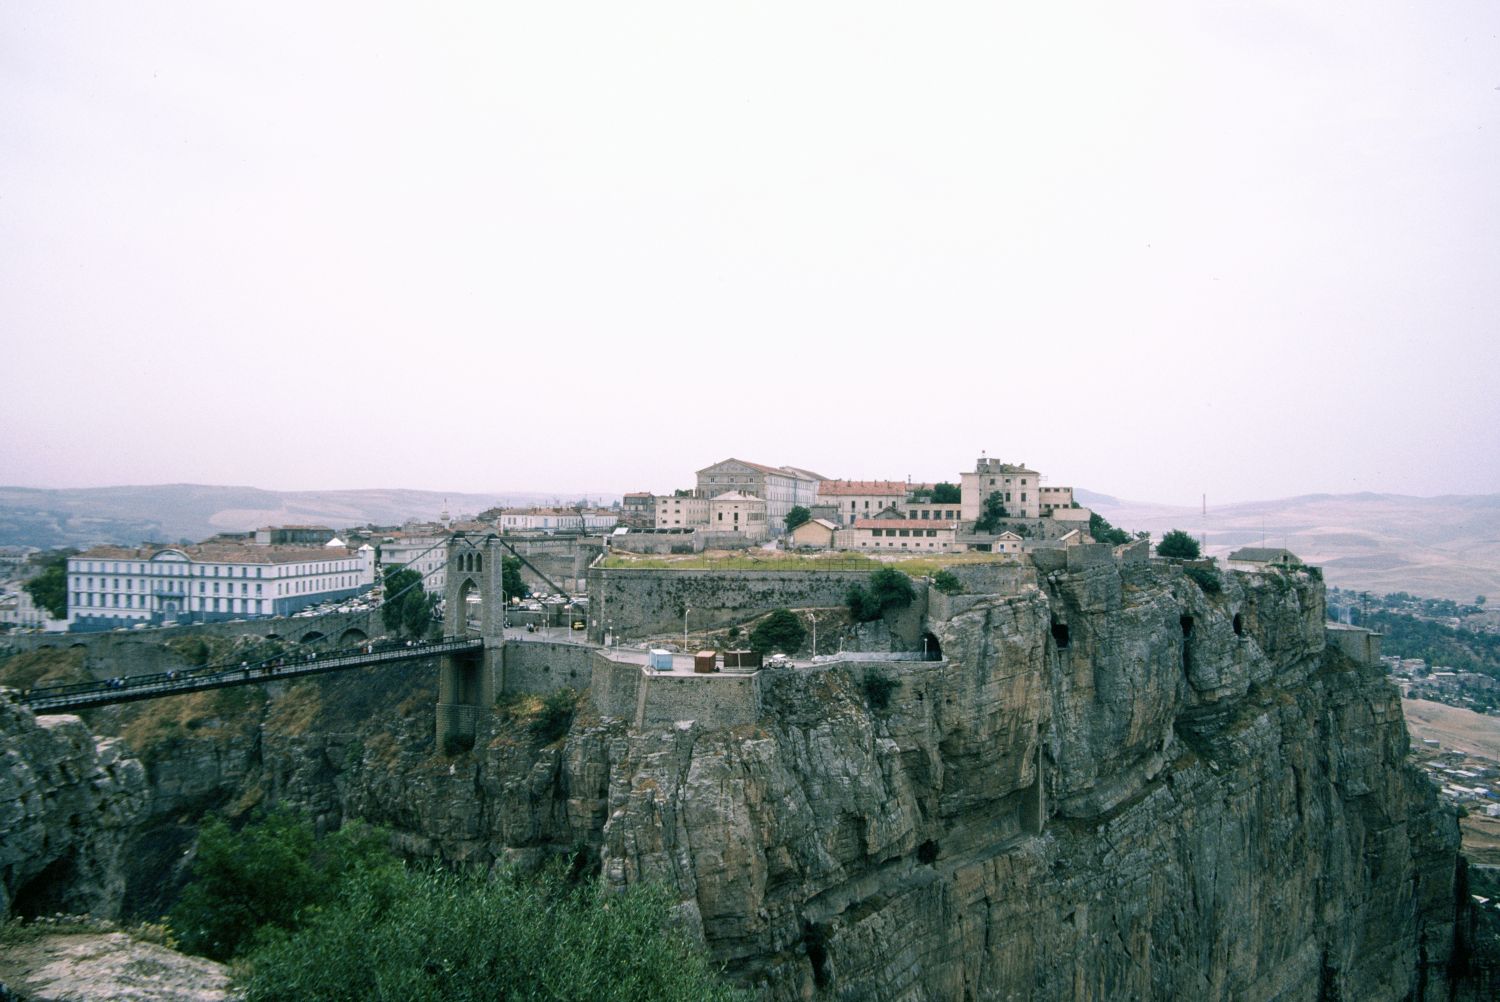 View towards south, with old medina and army barracks on top of hill